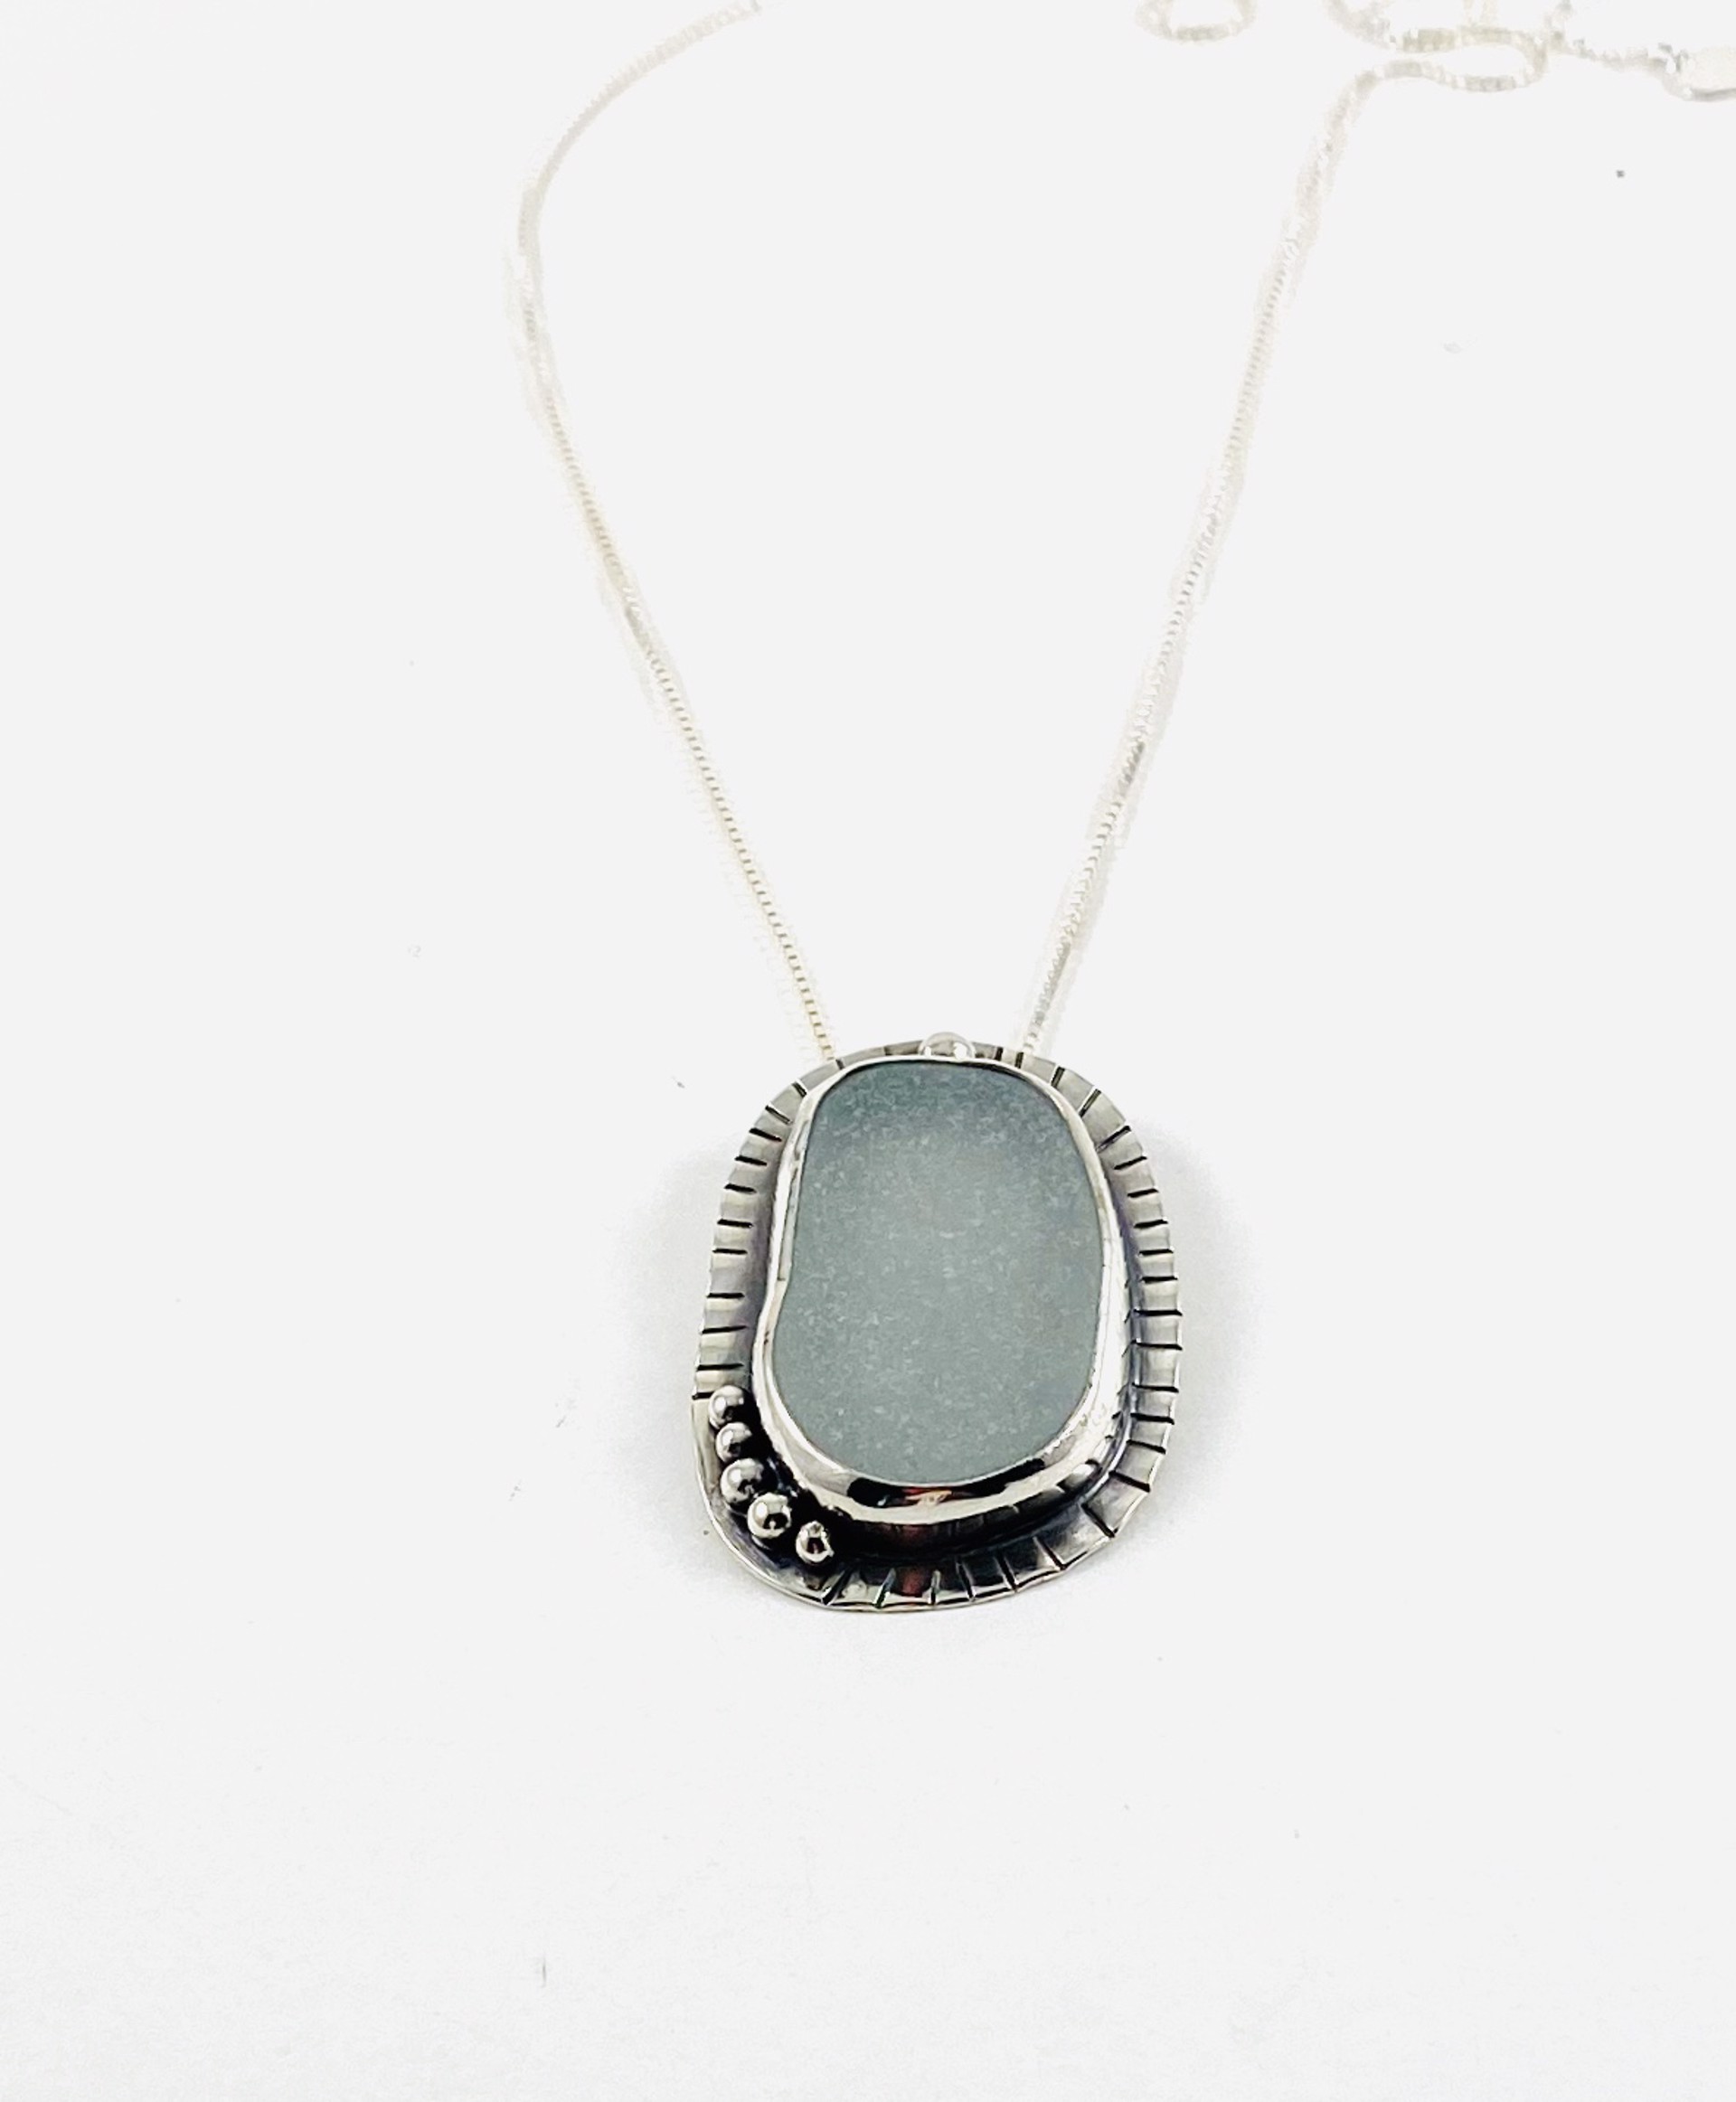 AB215 Silver and Sea Glass Pendant, Silver 16"Chain by Anne Bivens